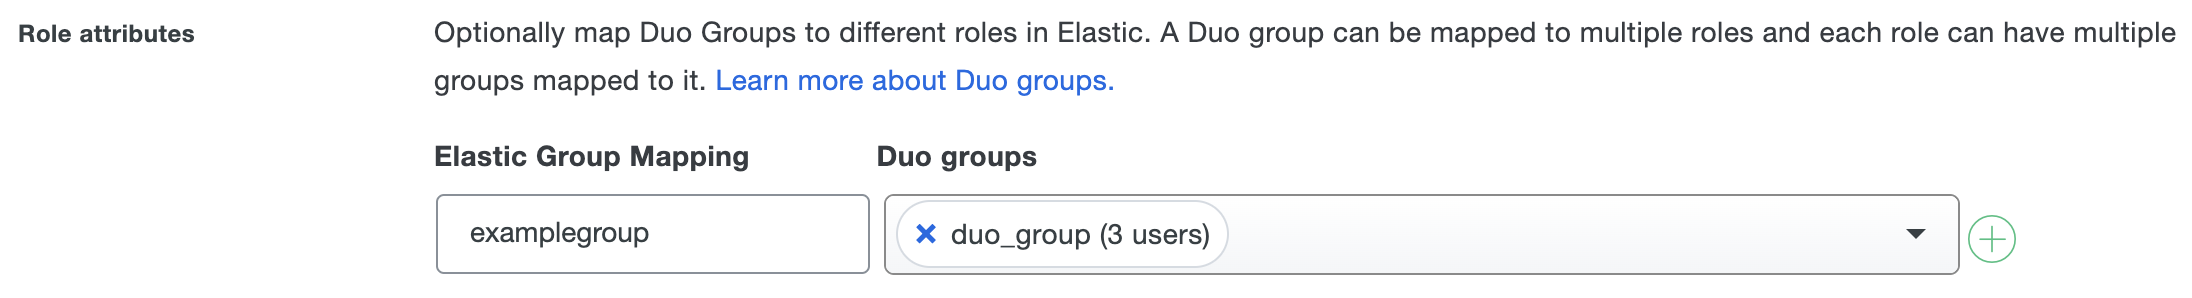 Duo Elastic Role Attributes Fields